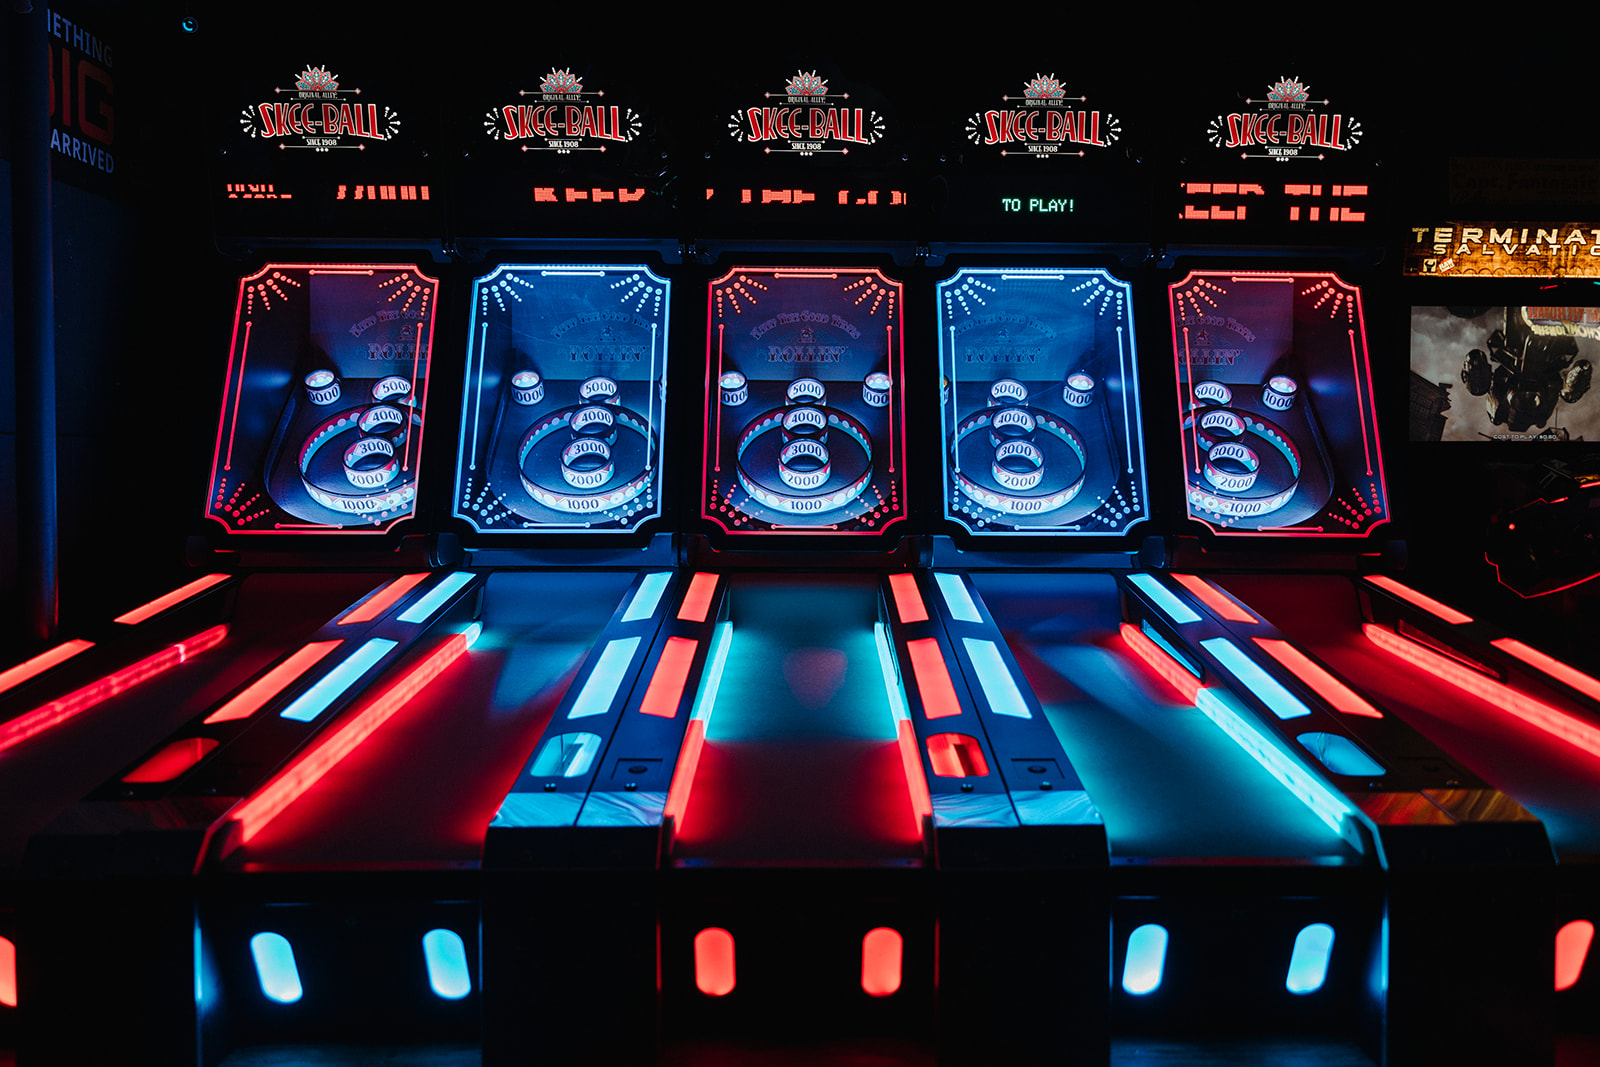 The skee ball games glowing with red and blue lights in this indoor Denver arcade